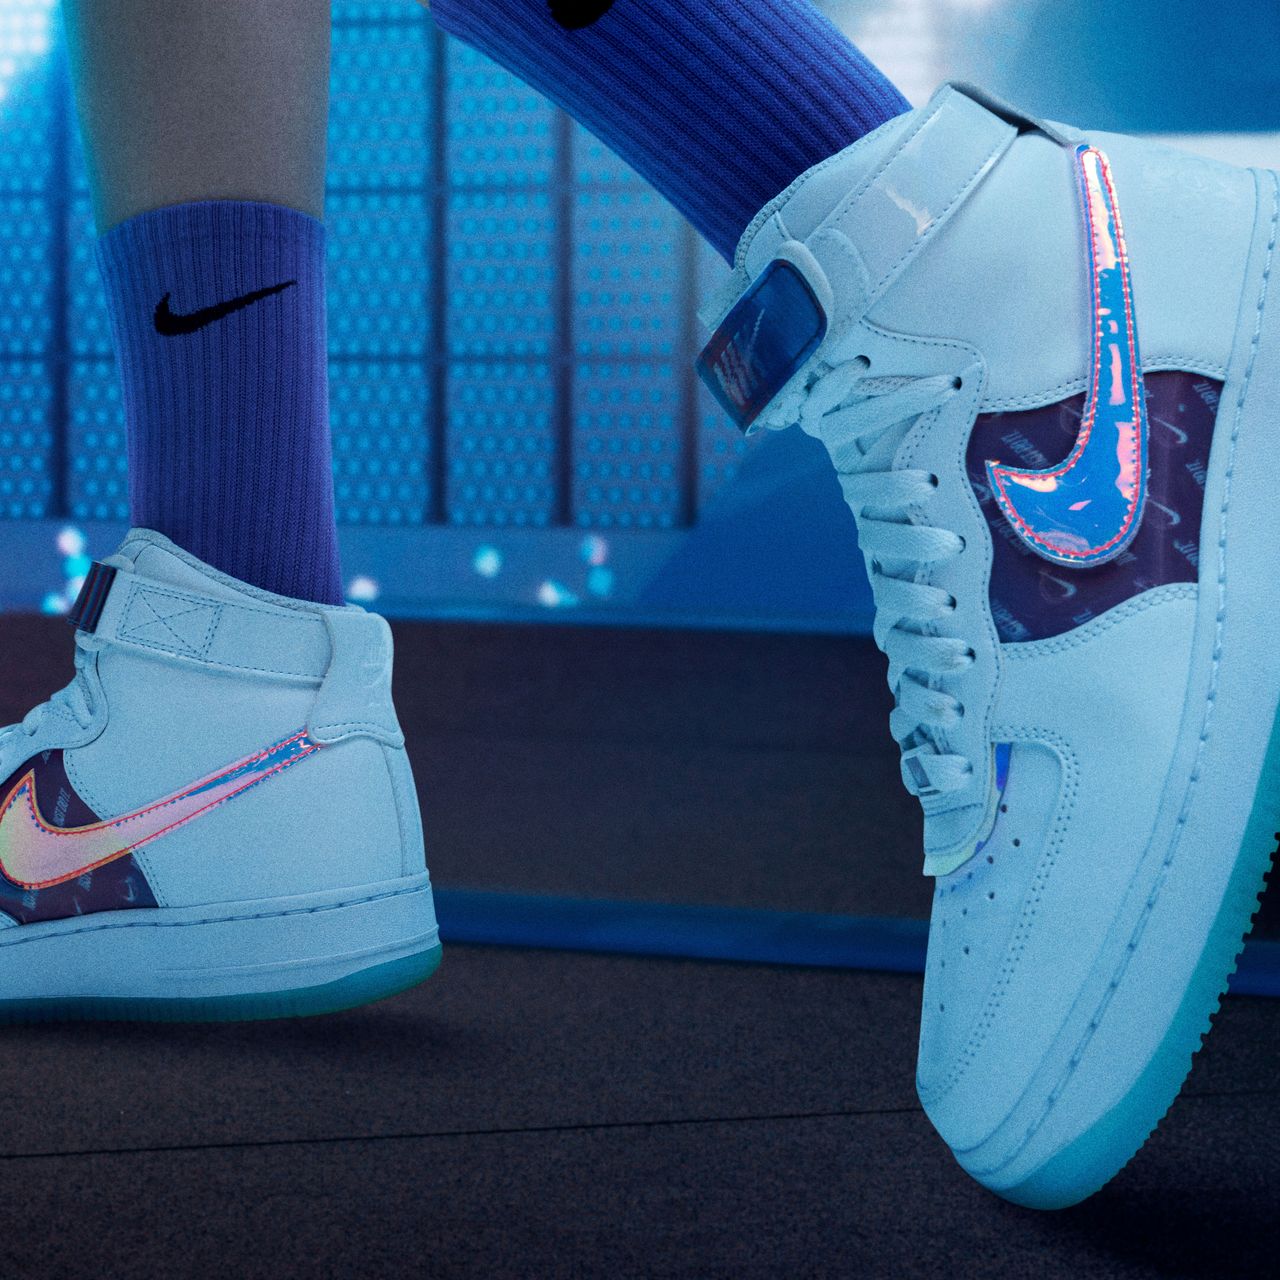 Compuesto sofá Arco iris Closer Look: Nike's League of Legends-Inspired Collection - Sneaker Freaker